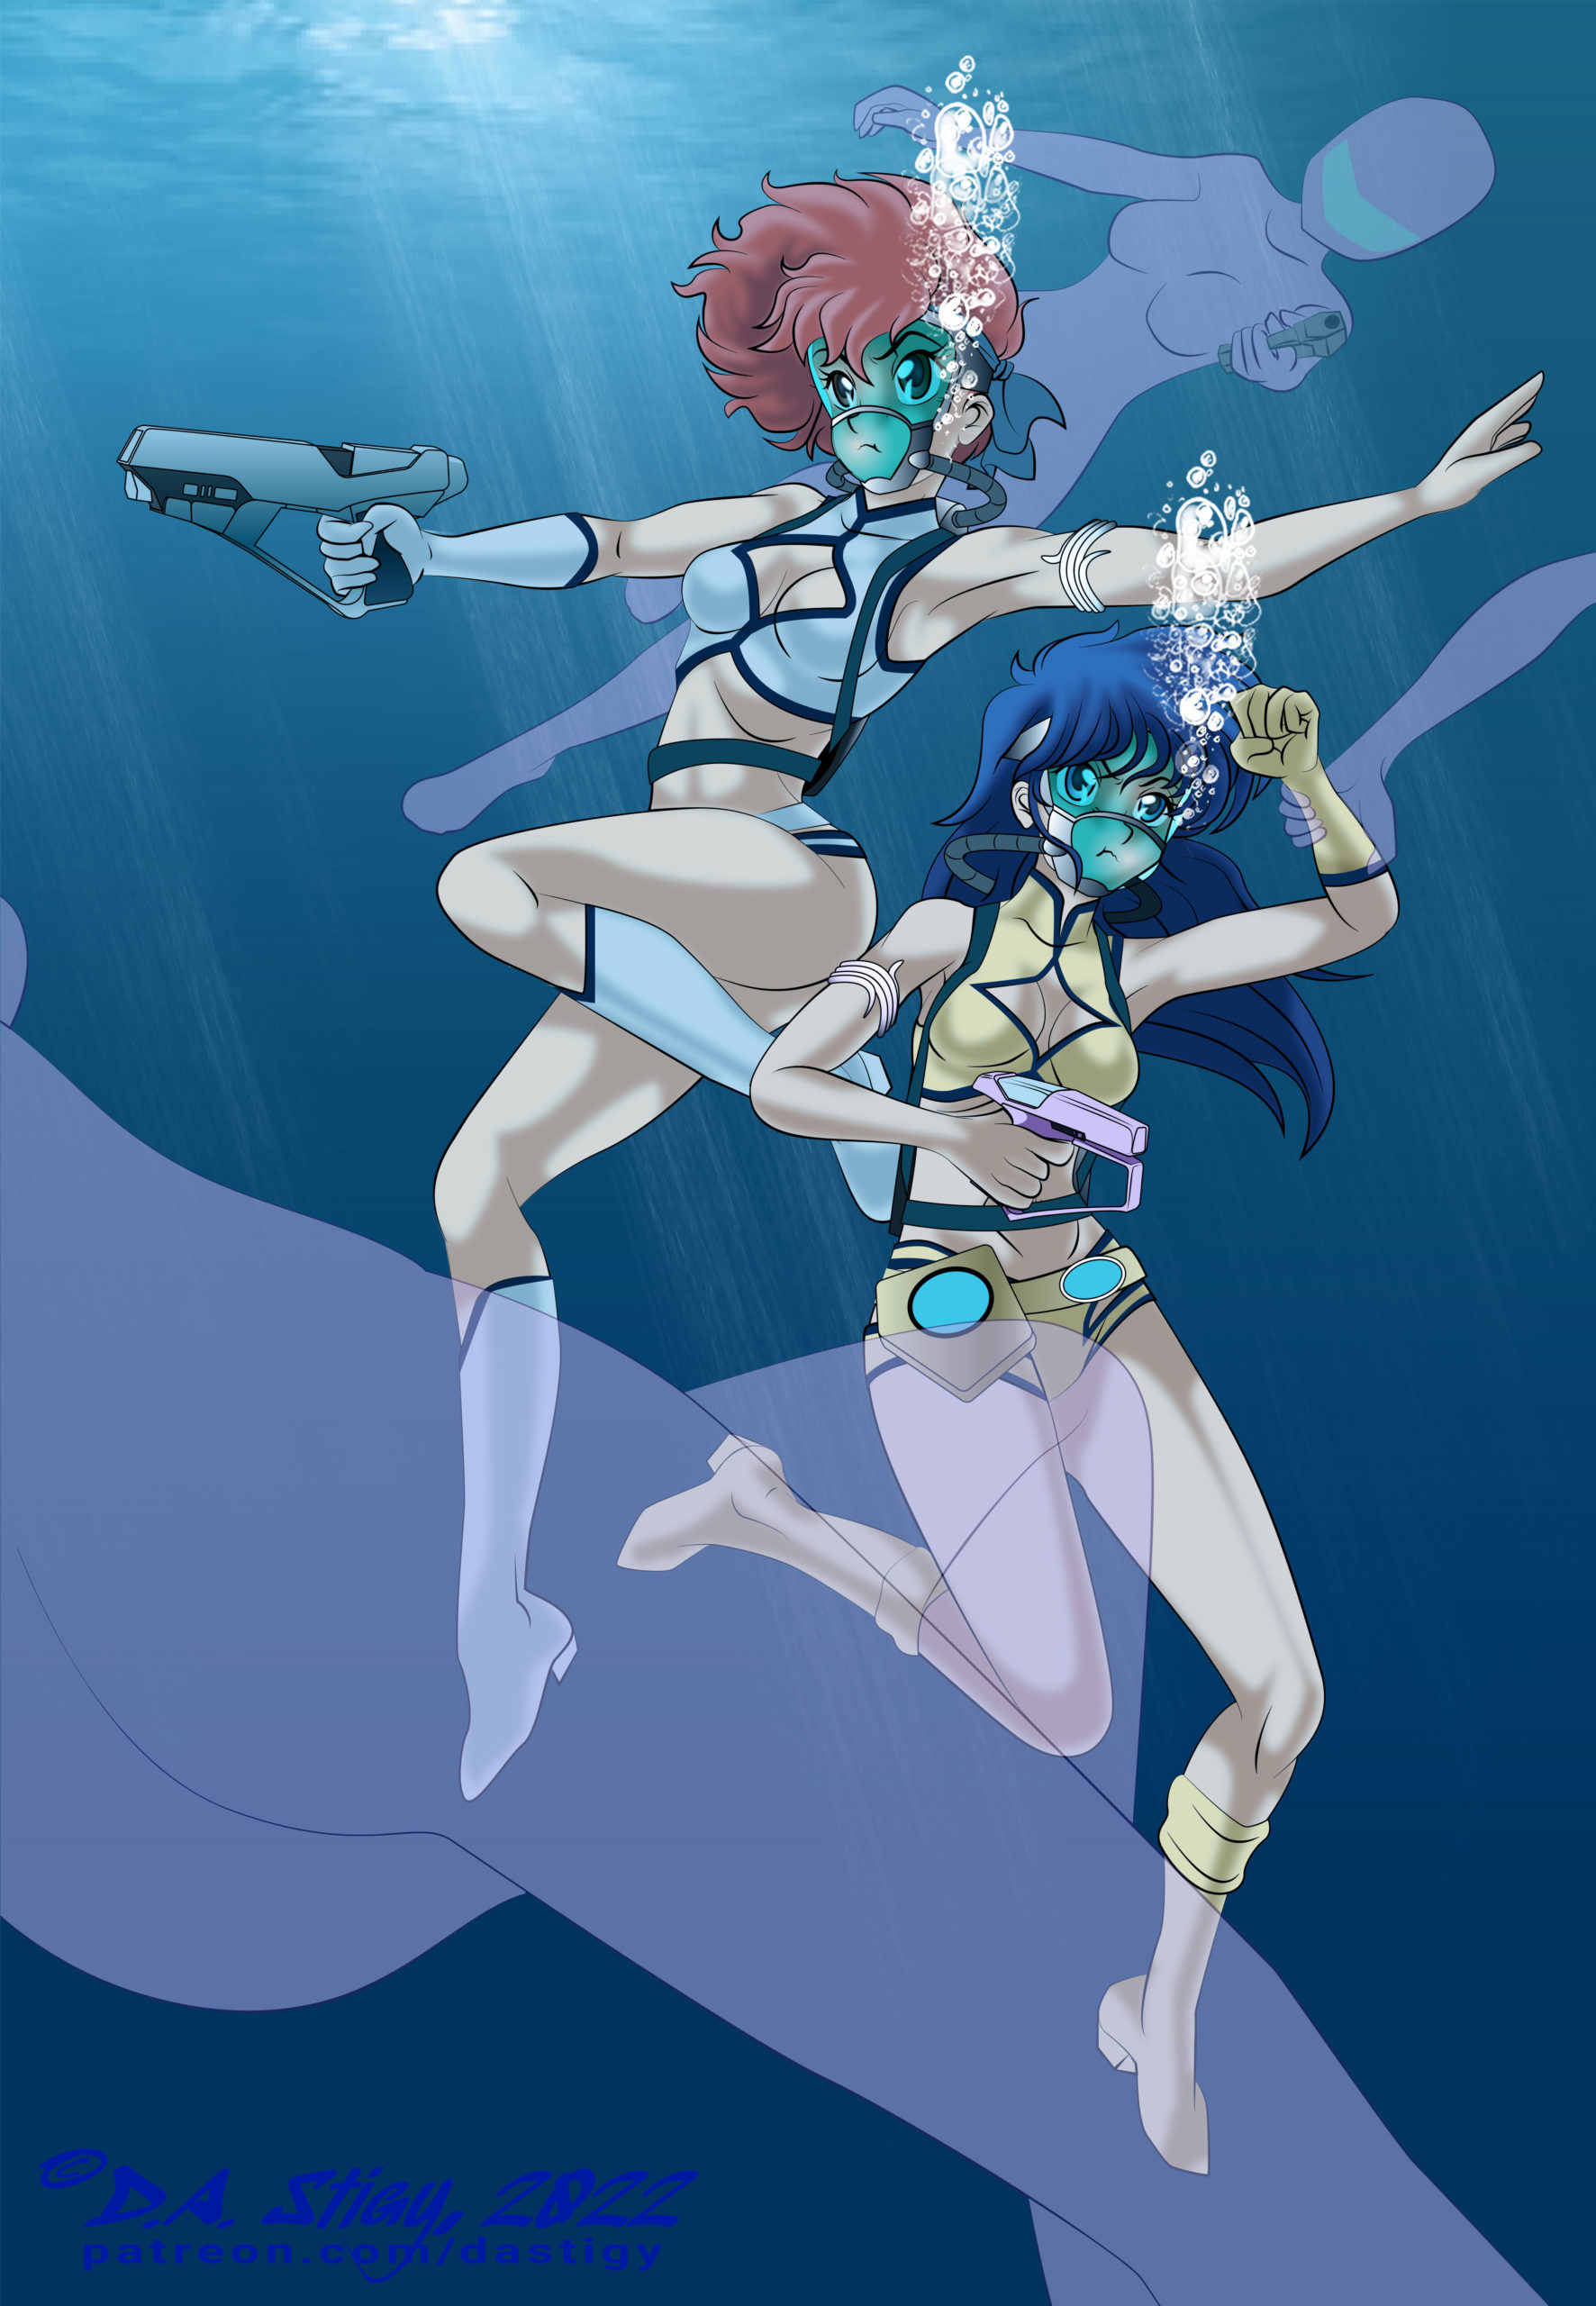 Kei and Yuri in scuba gear, surrounded by enemies